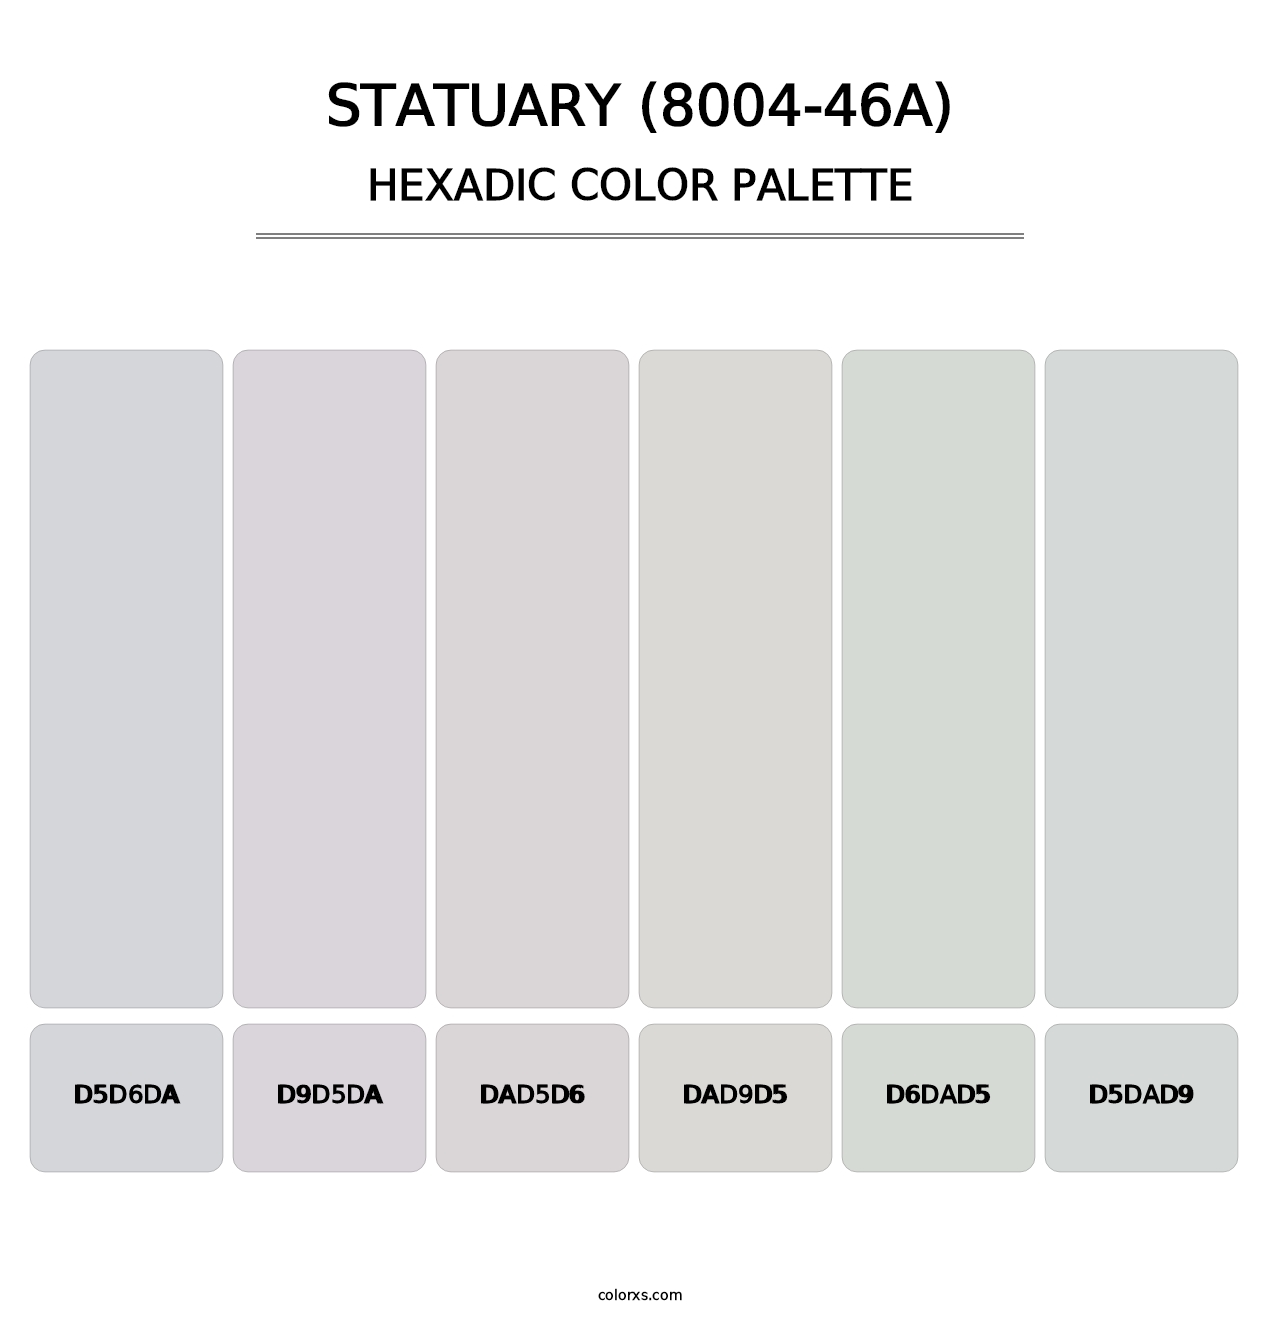 Statuary (8004-46A) - Hexadic Color Palette